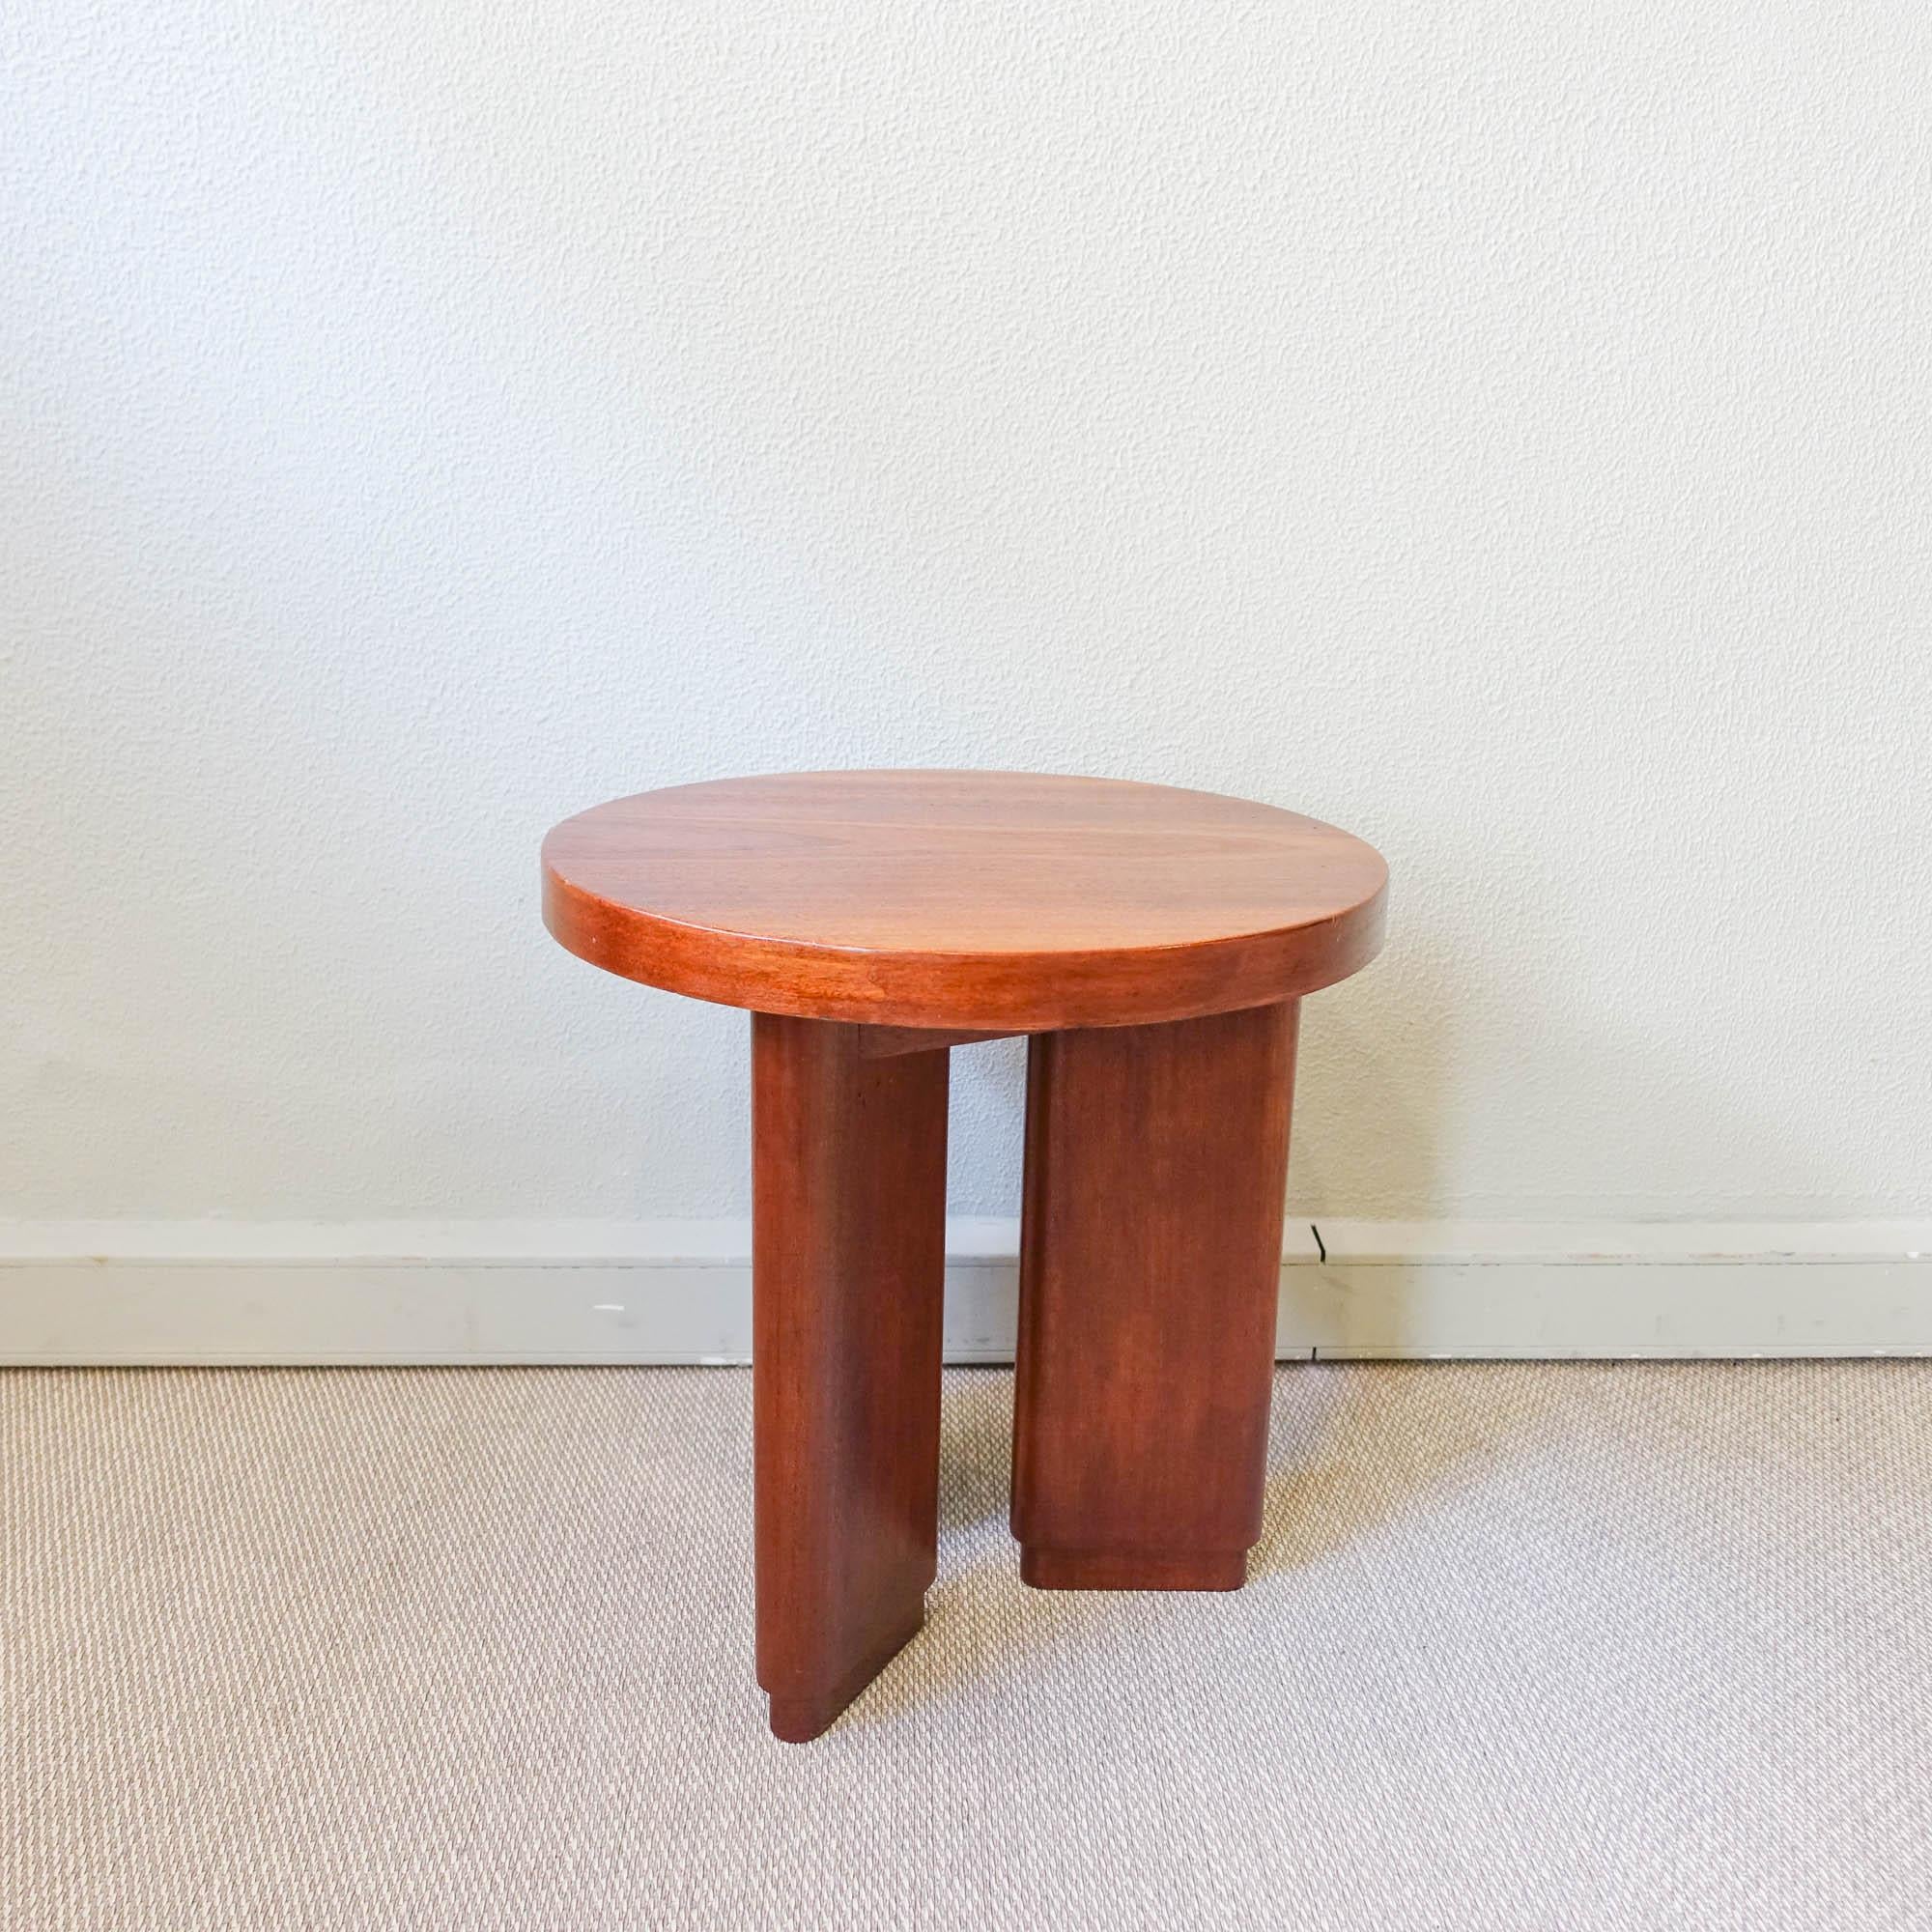 This extremely rare side table, model Lisboa, was designed and produced by Olaio, in Portugal, during 1940's. This is an unusual and unique design, with simple and clean lines, typical from Art Deco style. The three leg structure and top are made of